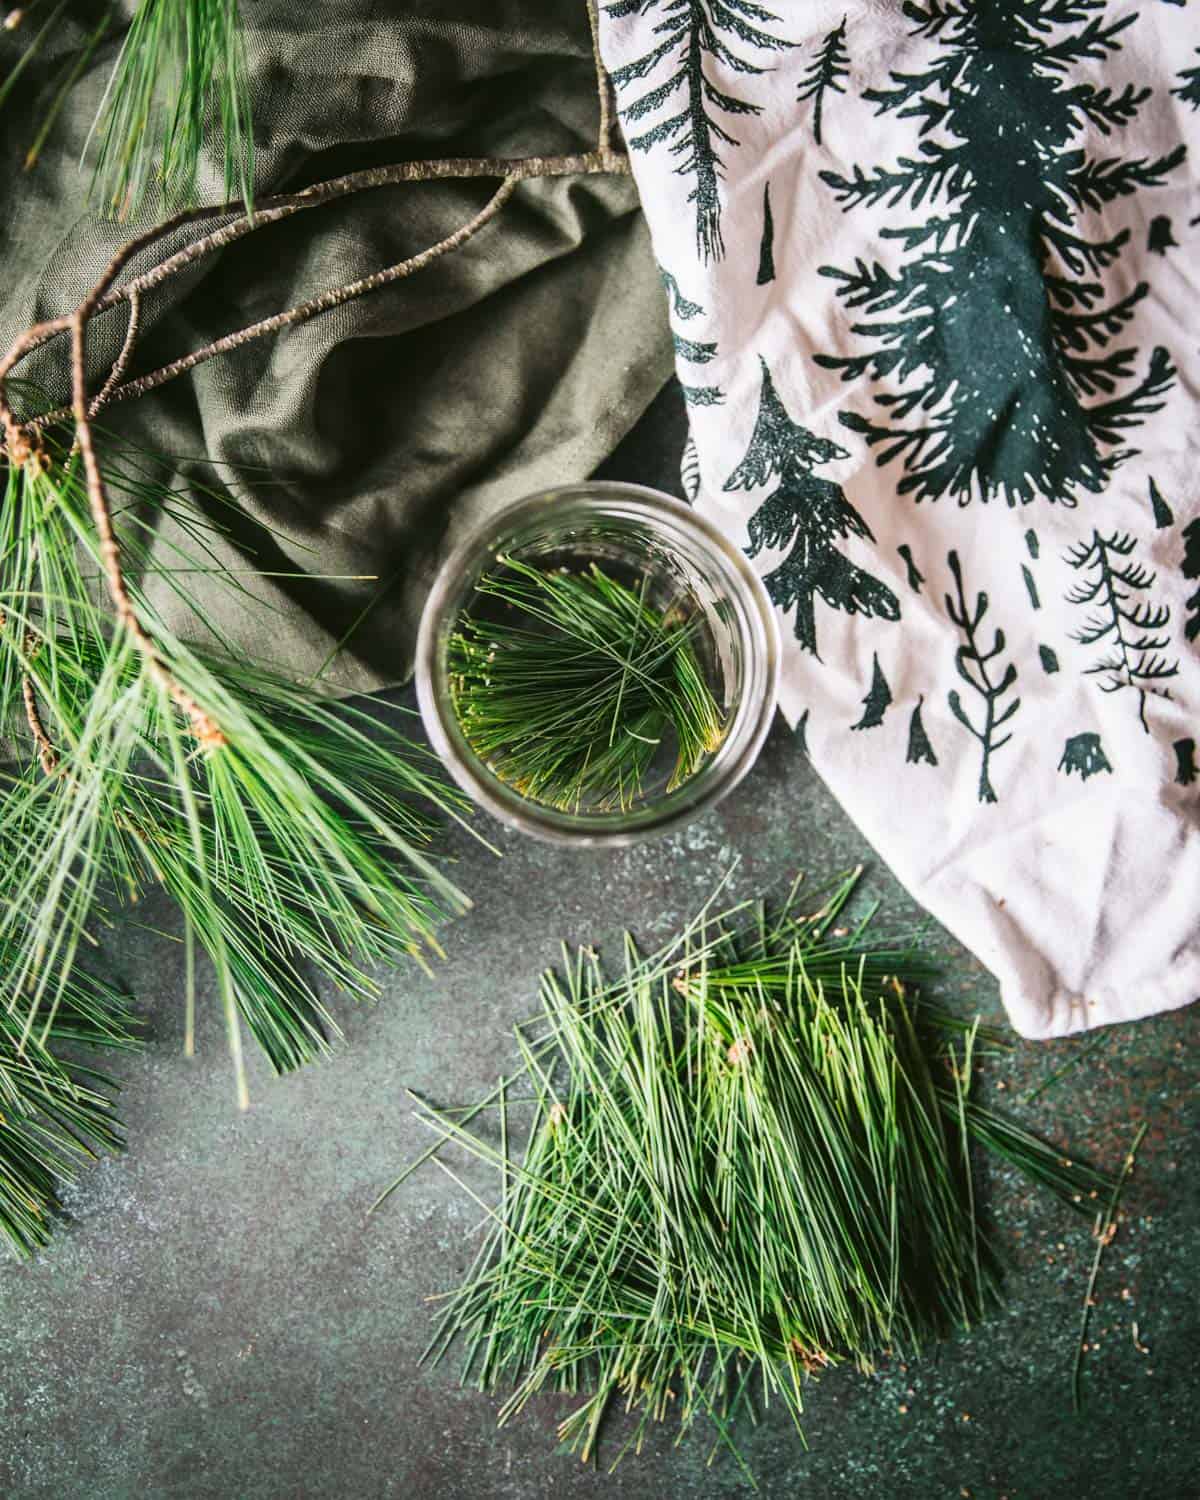 Top view of a jar filled with fresh pine needles, surrounded by pine fronds and a towel with a green tree on it.